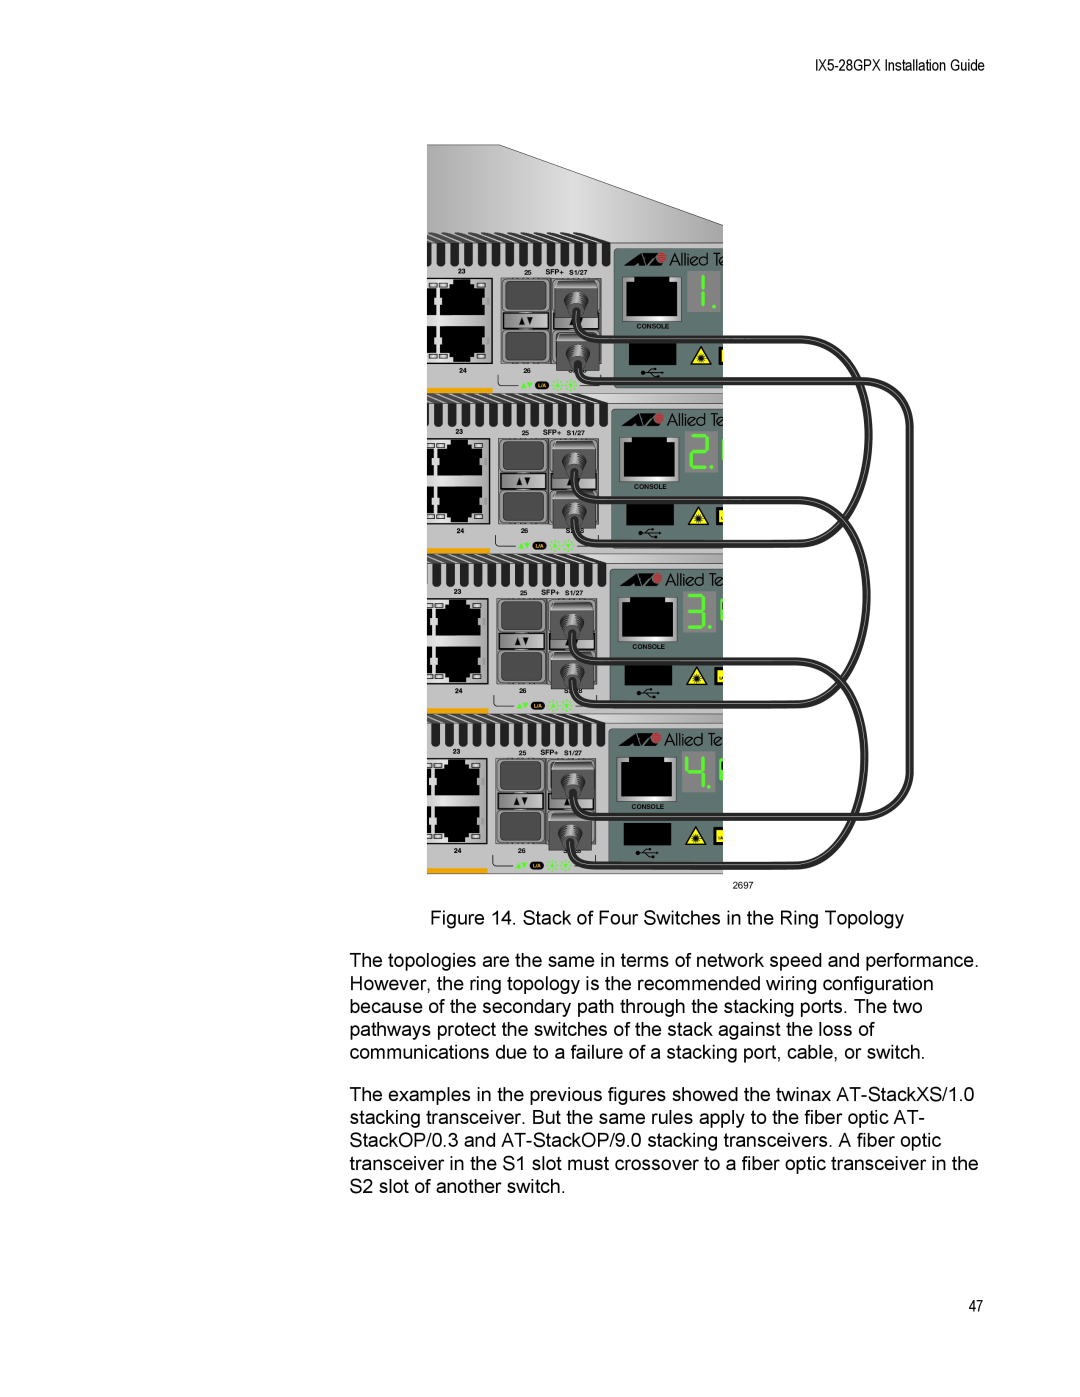 Allied Telesis AT-IX5-28GPX manual Stack of Four Switches in the Ring Topology 